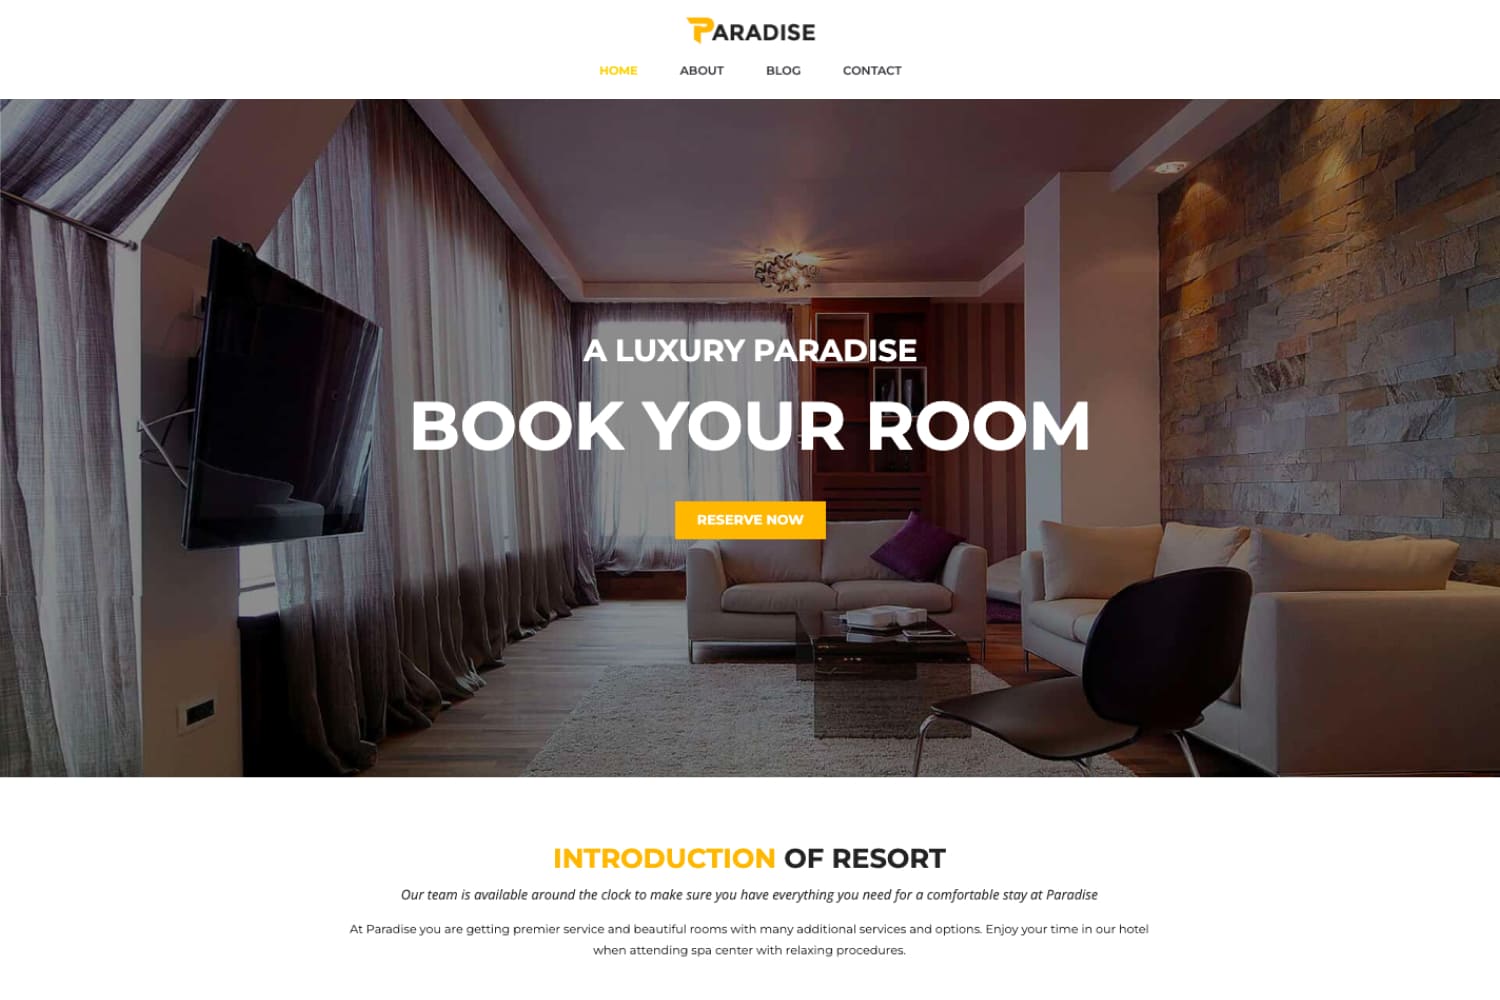 Homepage of the hotel website with a photo of the room and a big call to action.